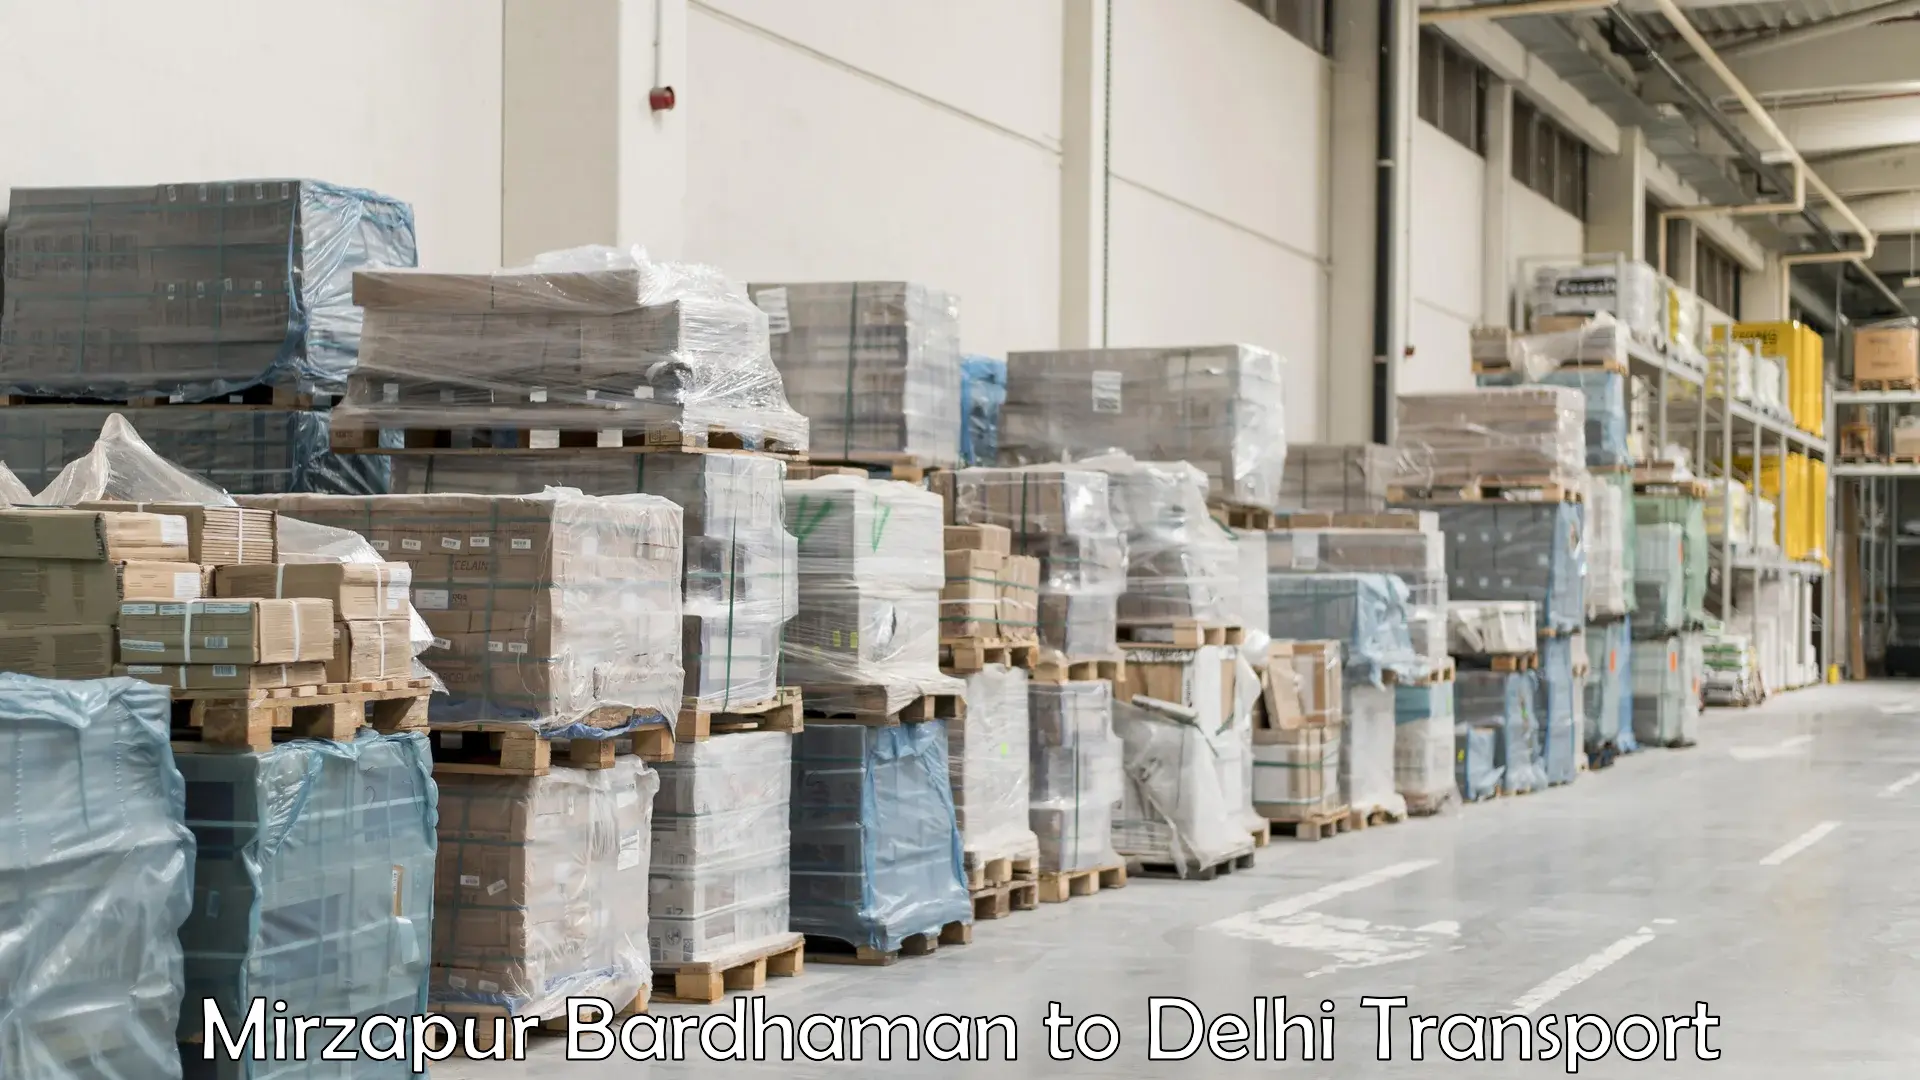 Truck transport companies in India Mirzapur Bardhaman to NCR